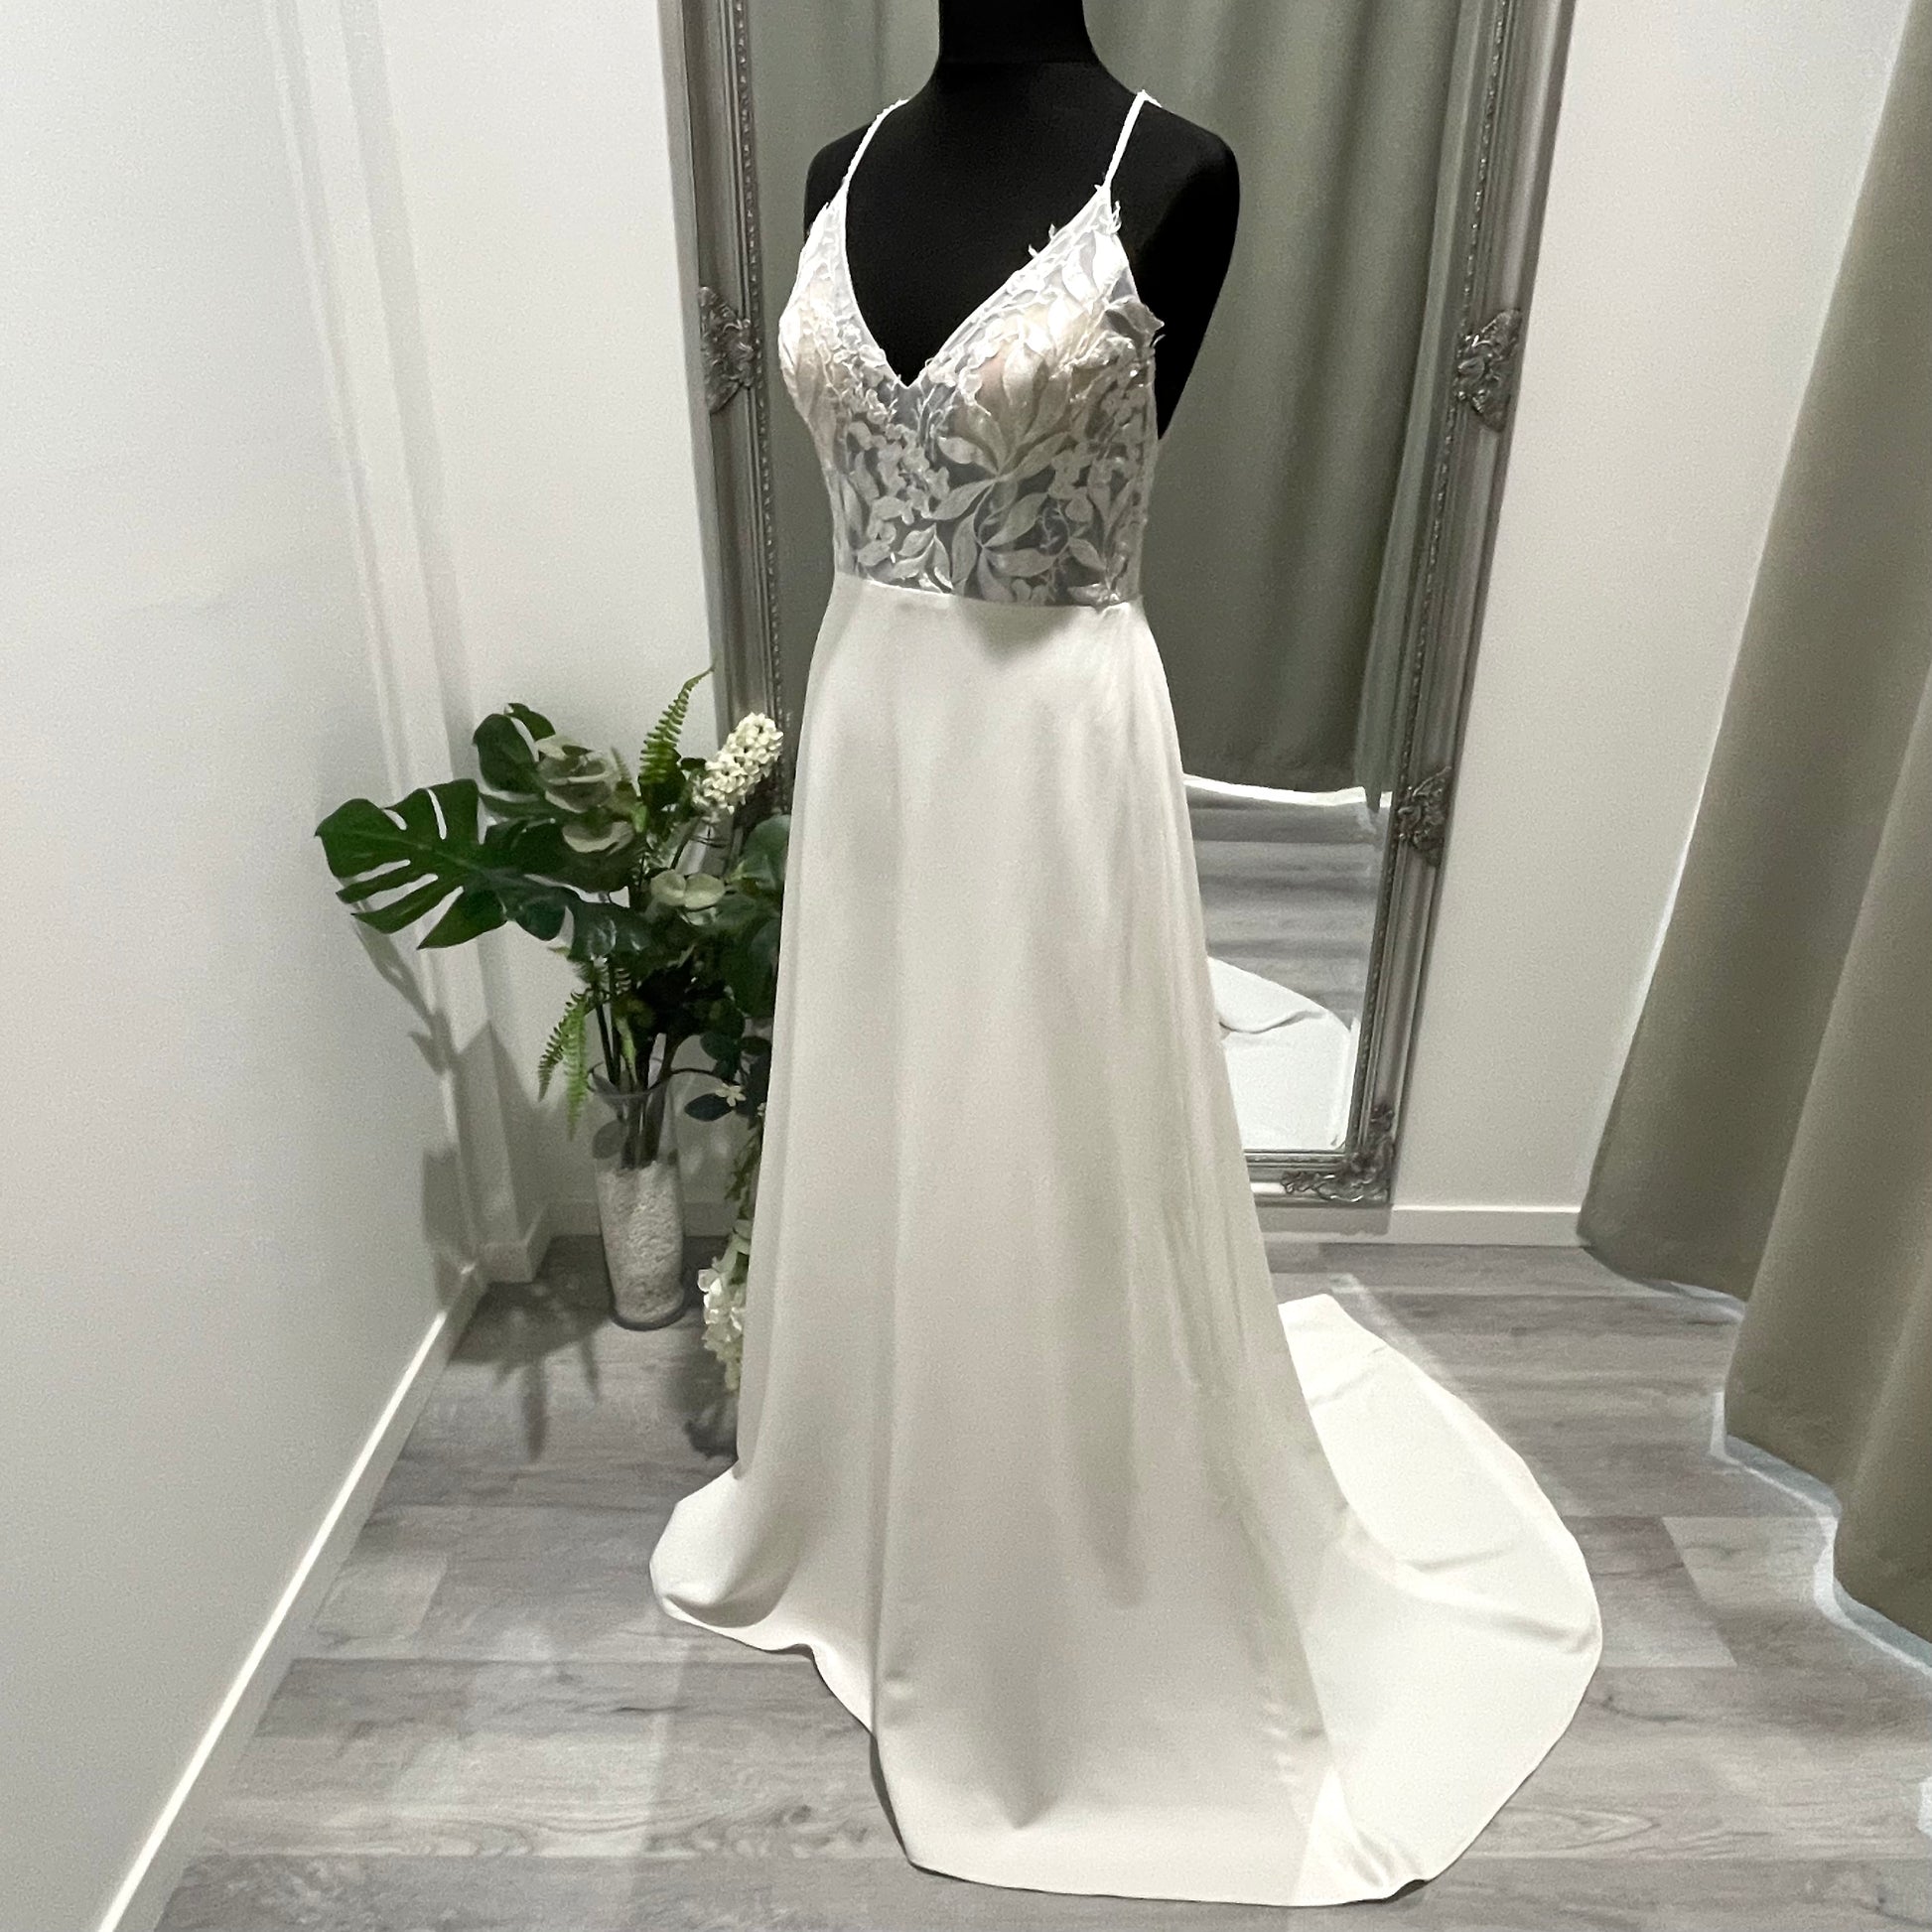 Krysta wedding dress with illusion bodice and beaded straps